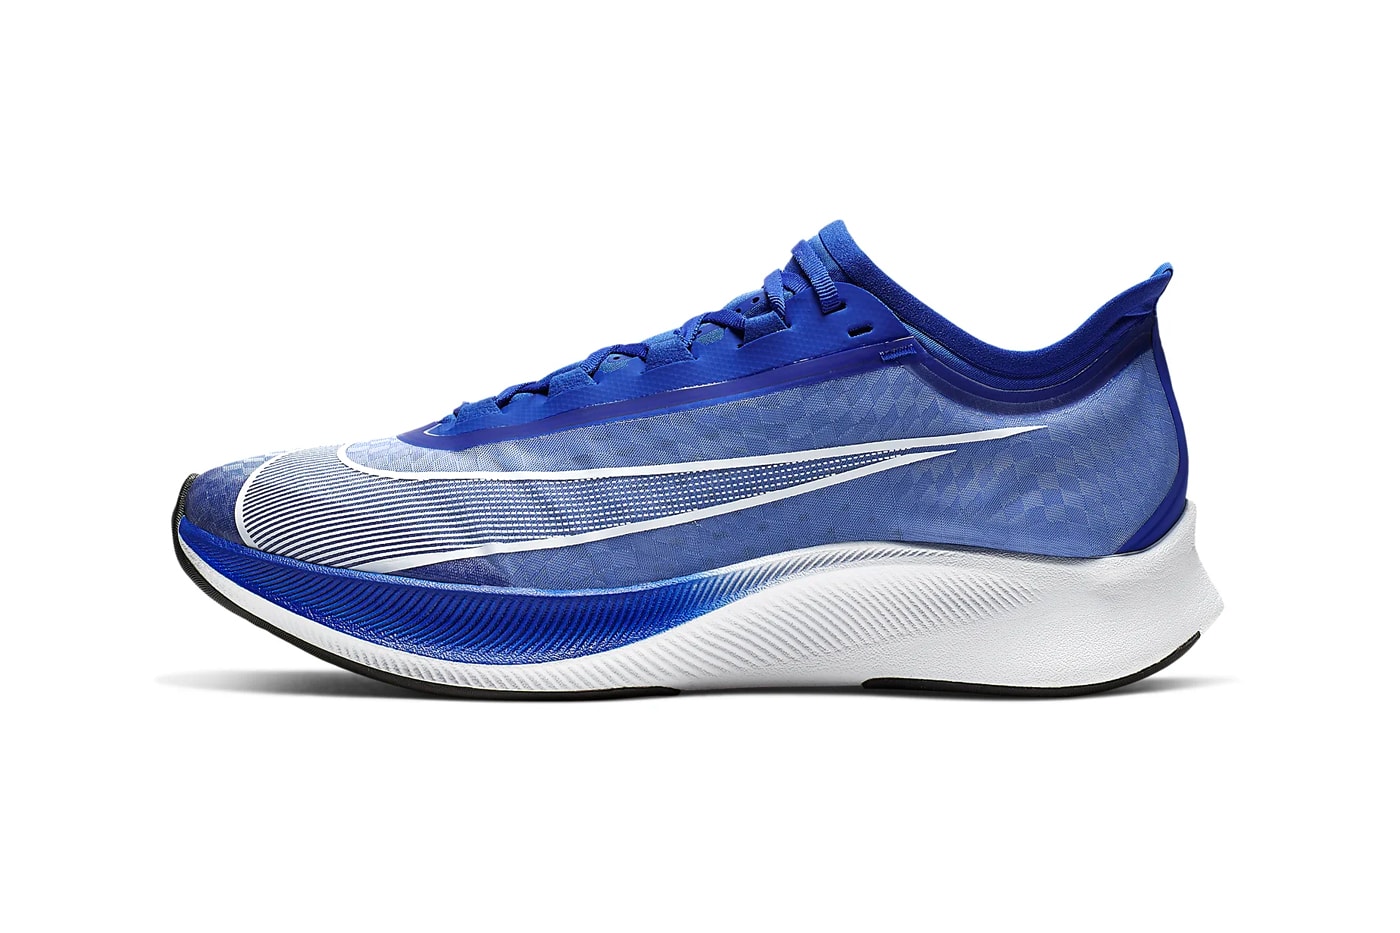 Nike Zoom Fly 3 Racer Blue Wolf Grey Black Pumice White Atmosphere Grey colorways tpu uppers react midsole vaporweave fastening lacing duo toned colorblock running time stamp